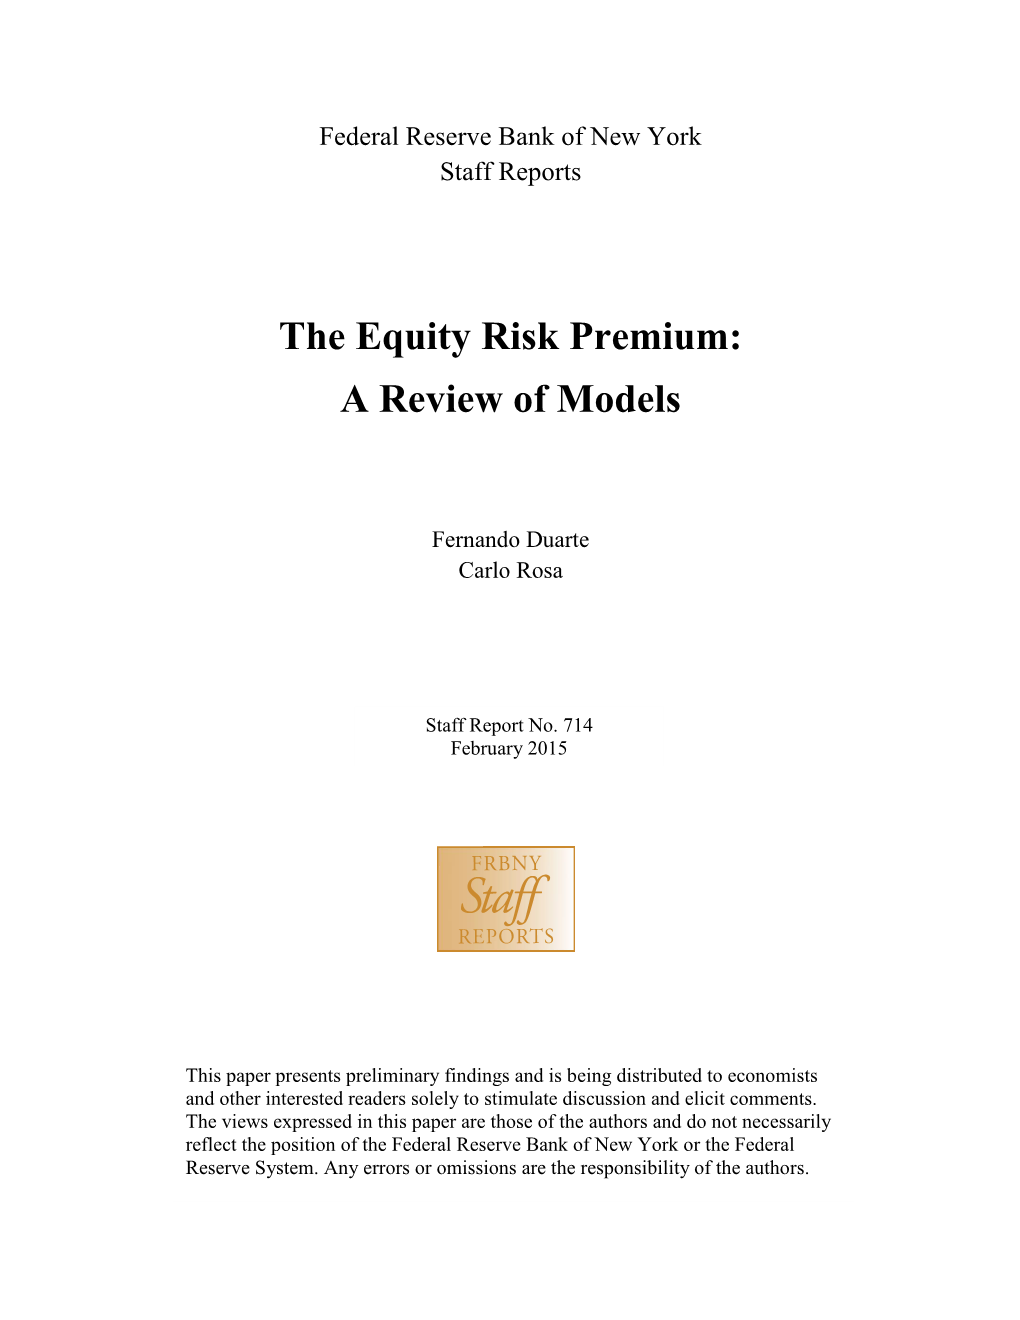 The Equity Risk Premium: a Review of Models